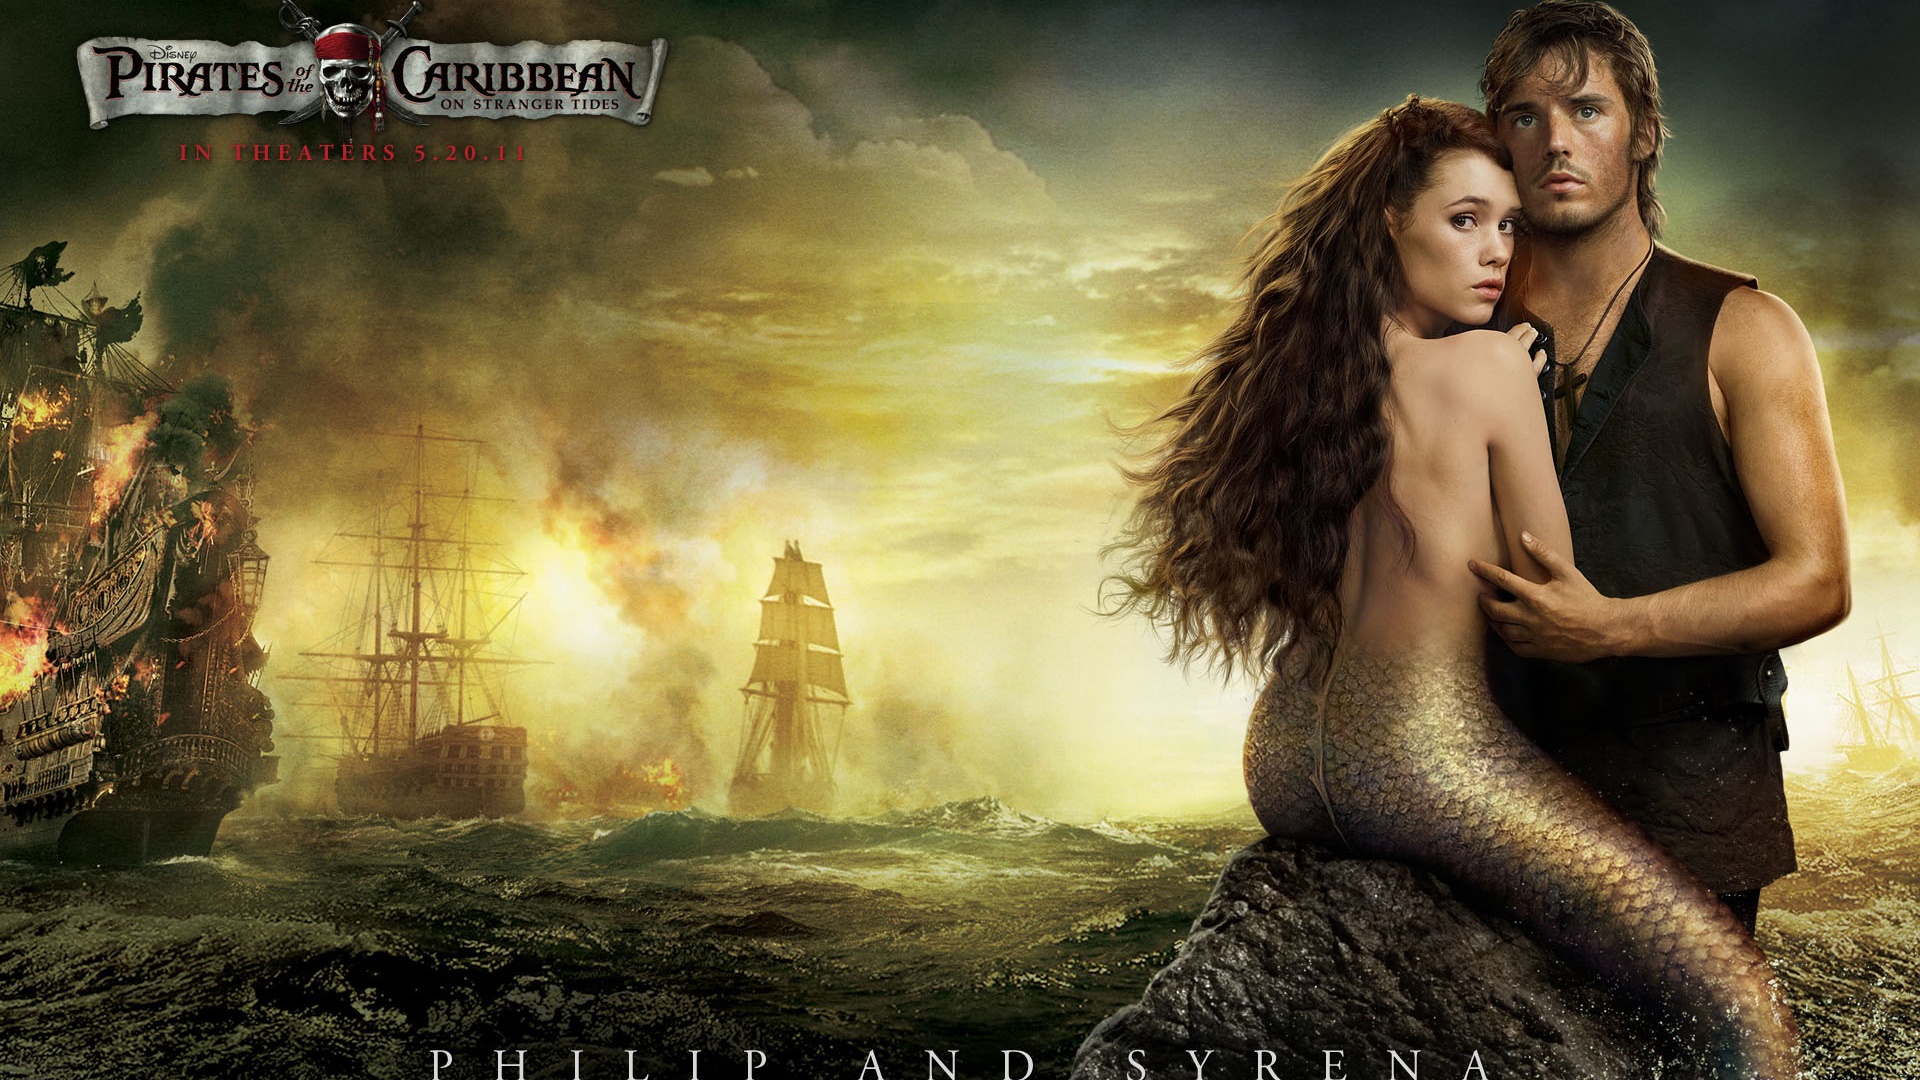 Pirates Of The Caribbean On Stranger Tides Wallpapers 13